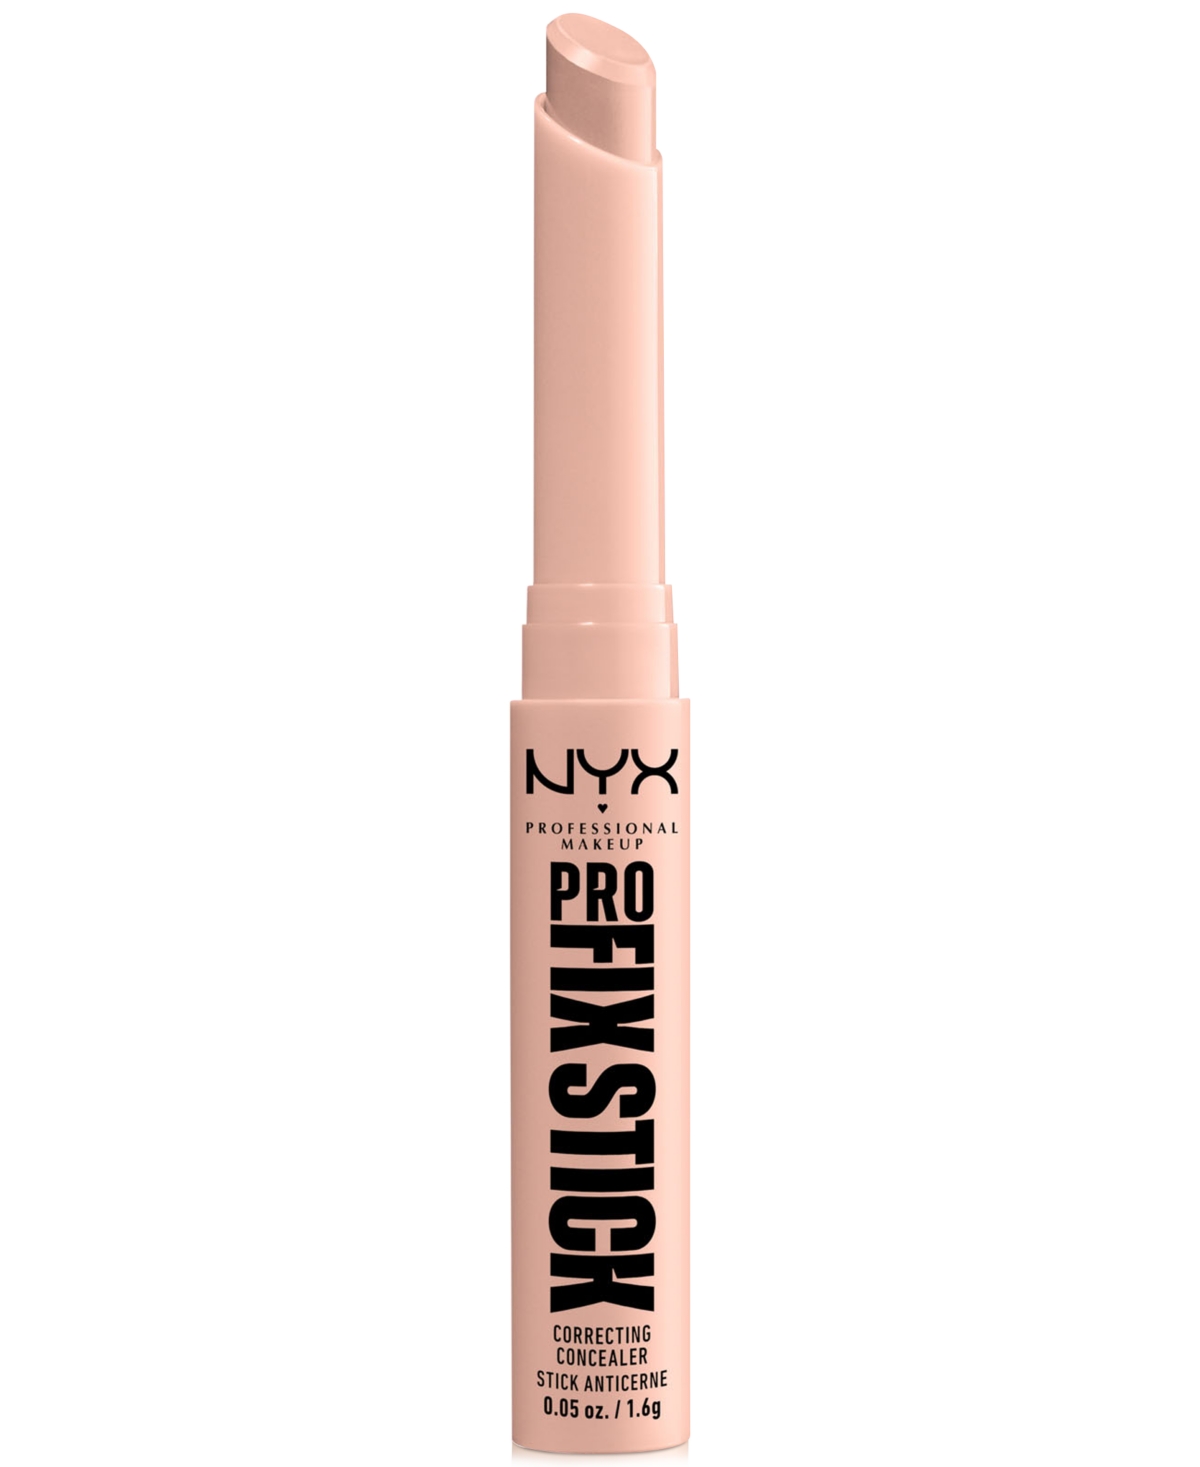 Nyx Professional Makeup Pro Fix Stick Correcting Concealer, 0.05 Oz. In Pink